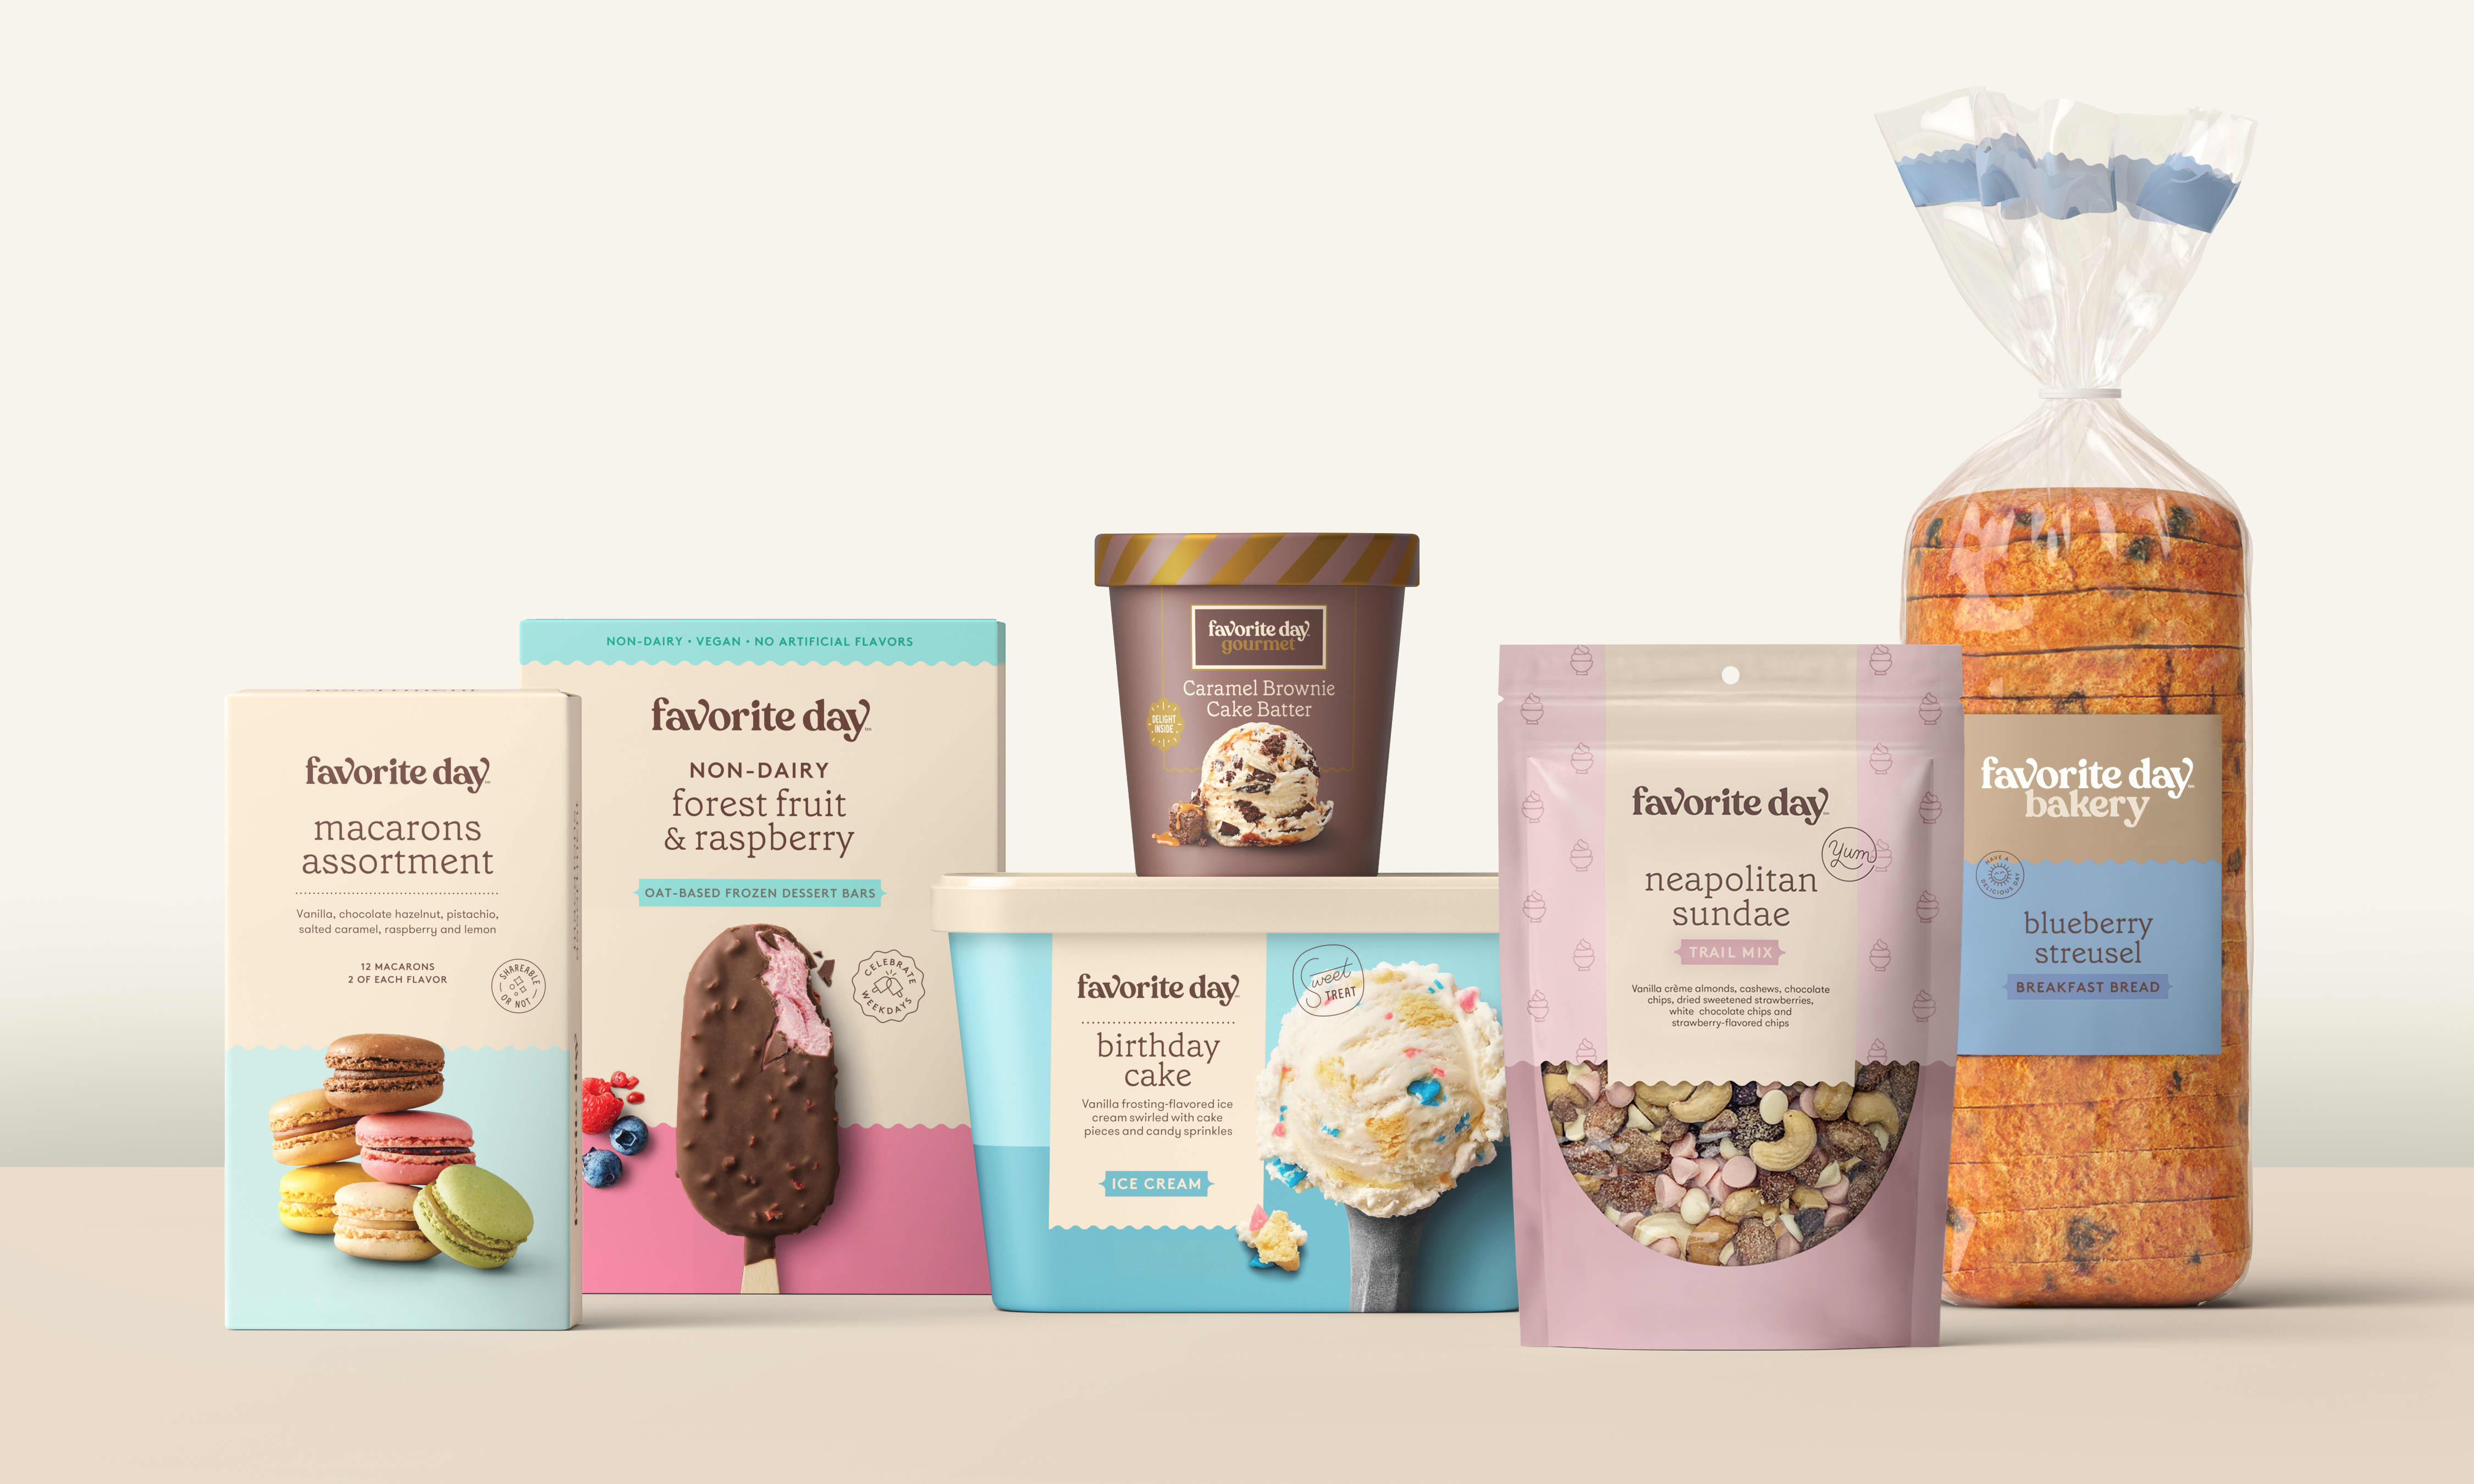 Target launches new grocery brand focusing on snacks, indulgences